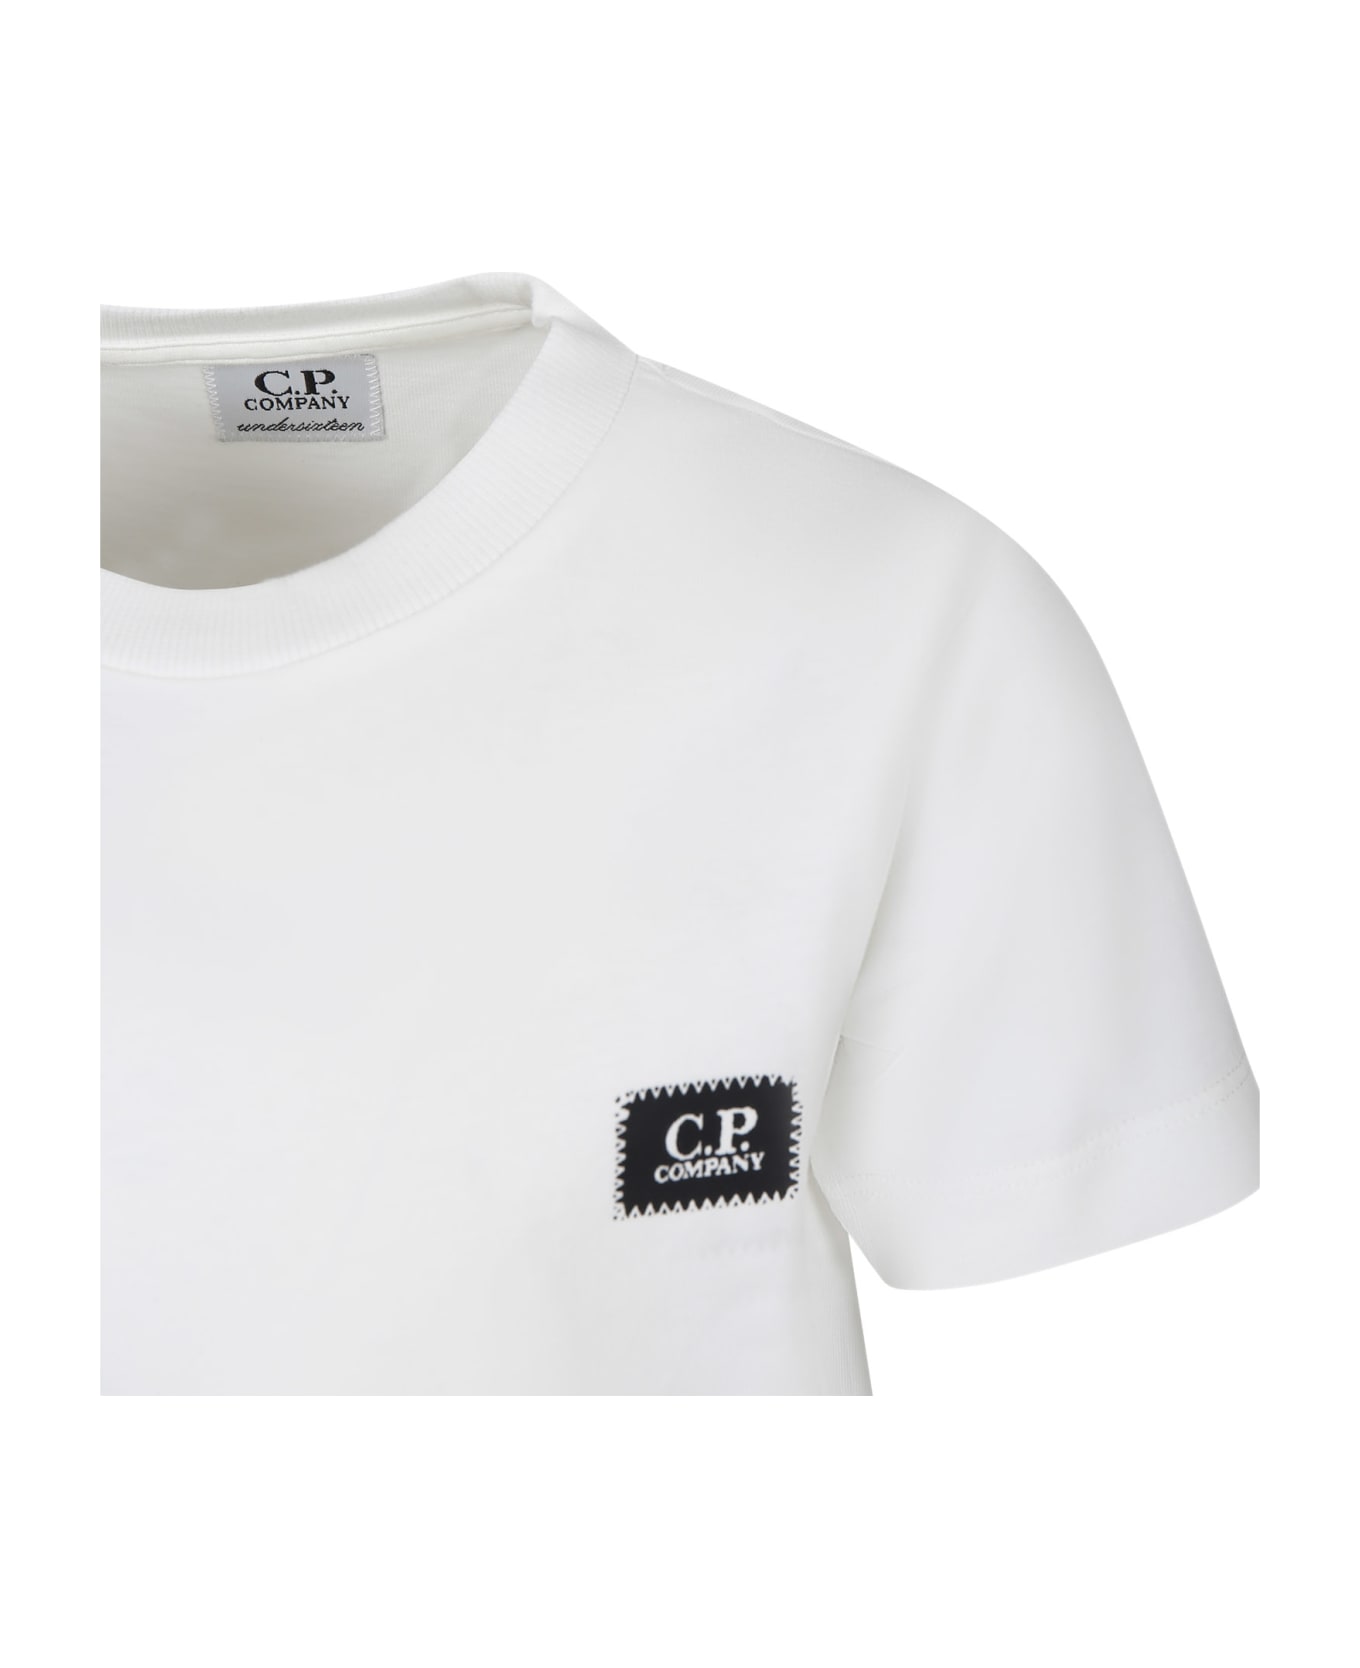 C.P. Company White T-shirt For Boy With Logo - Bianco